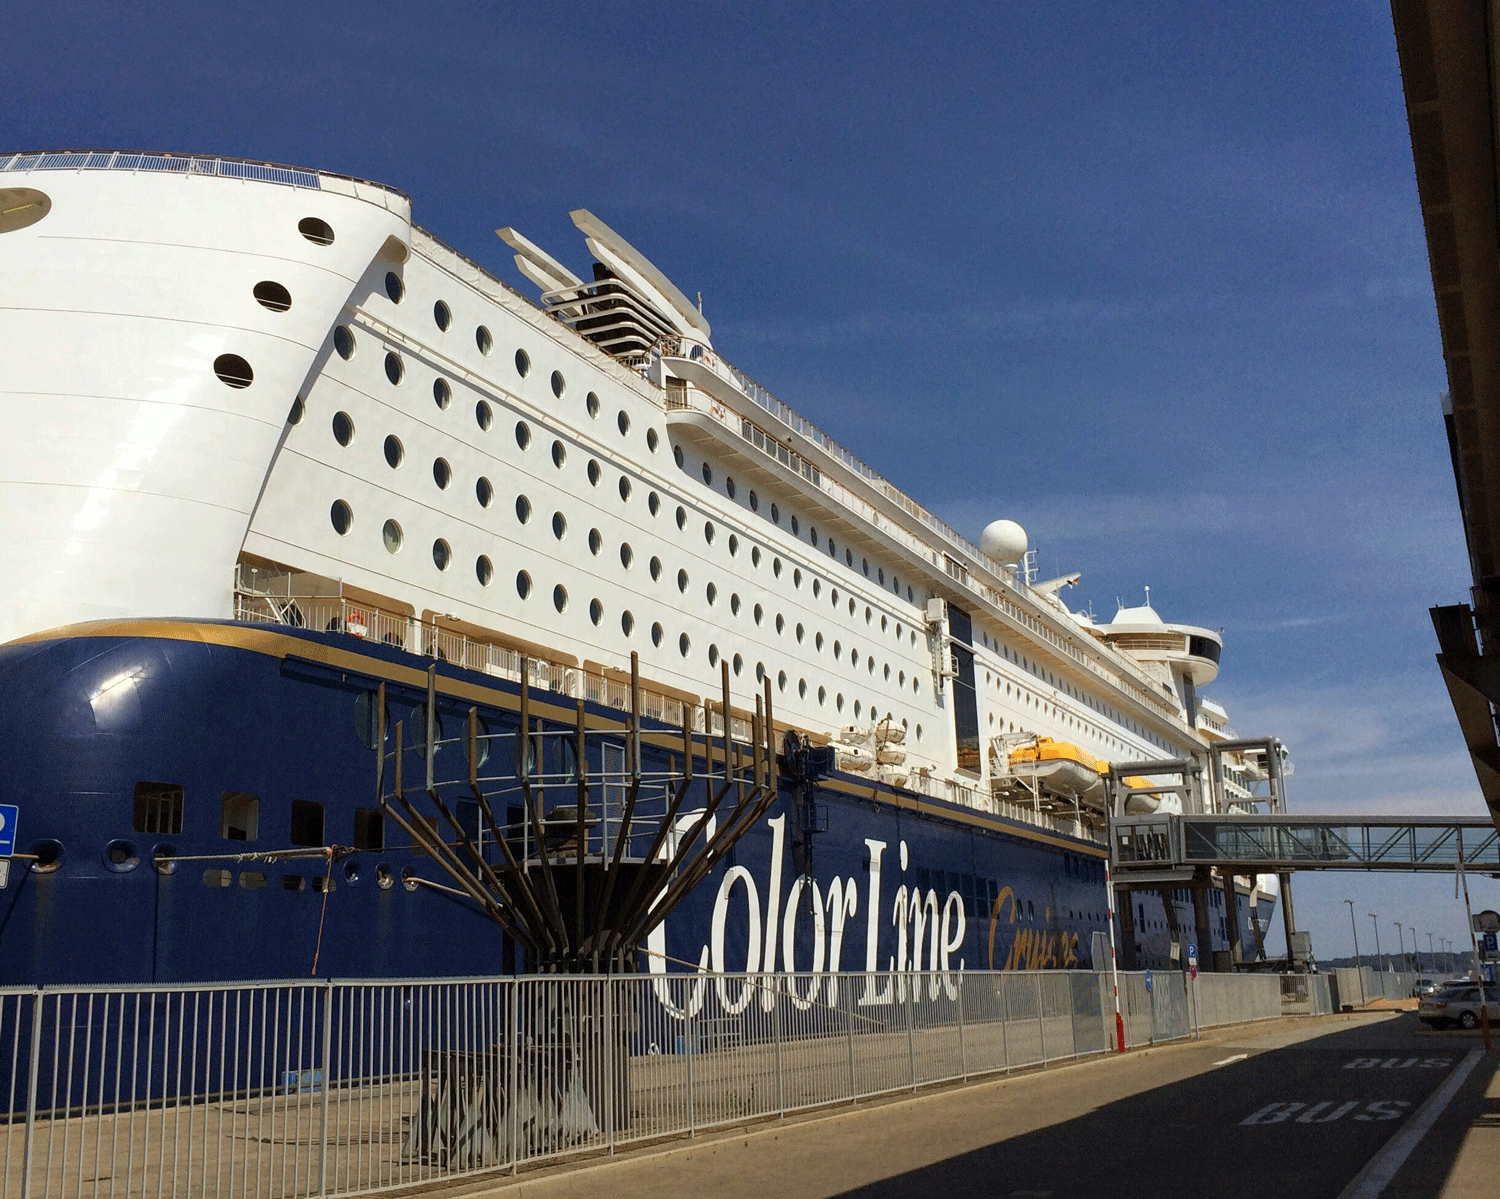 ColorLine with ferry in dock